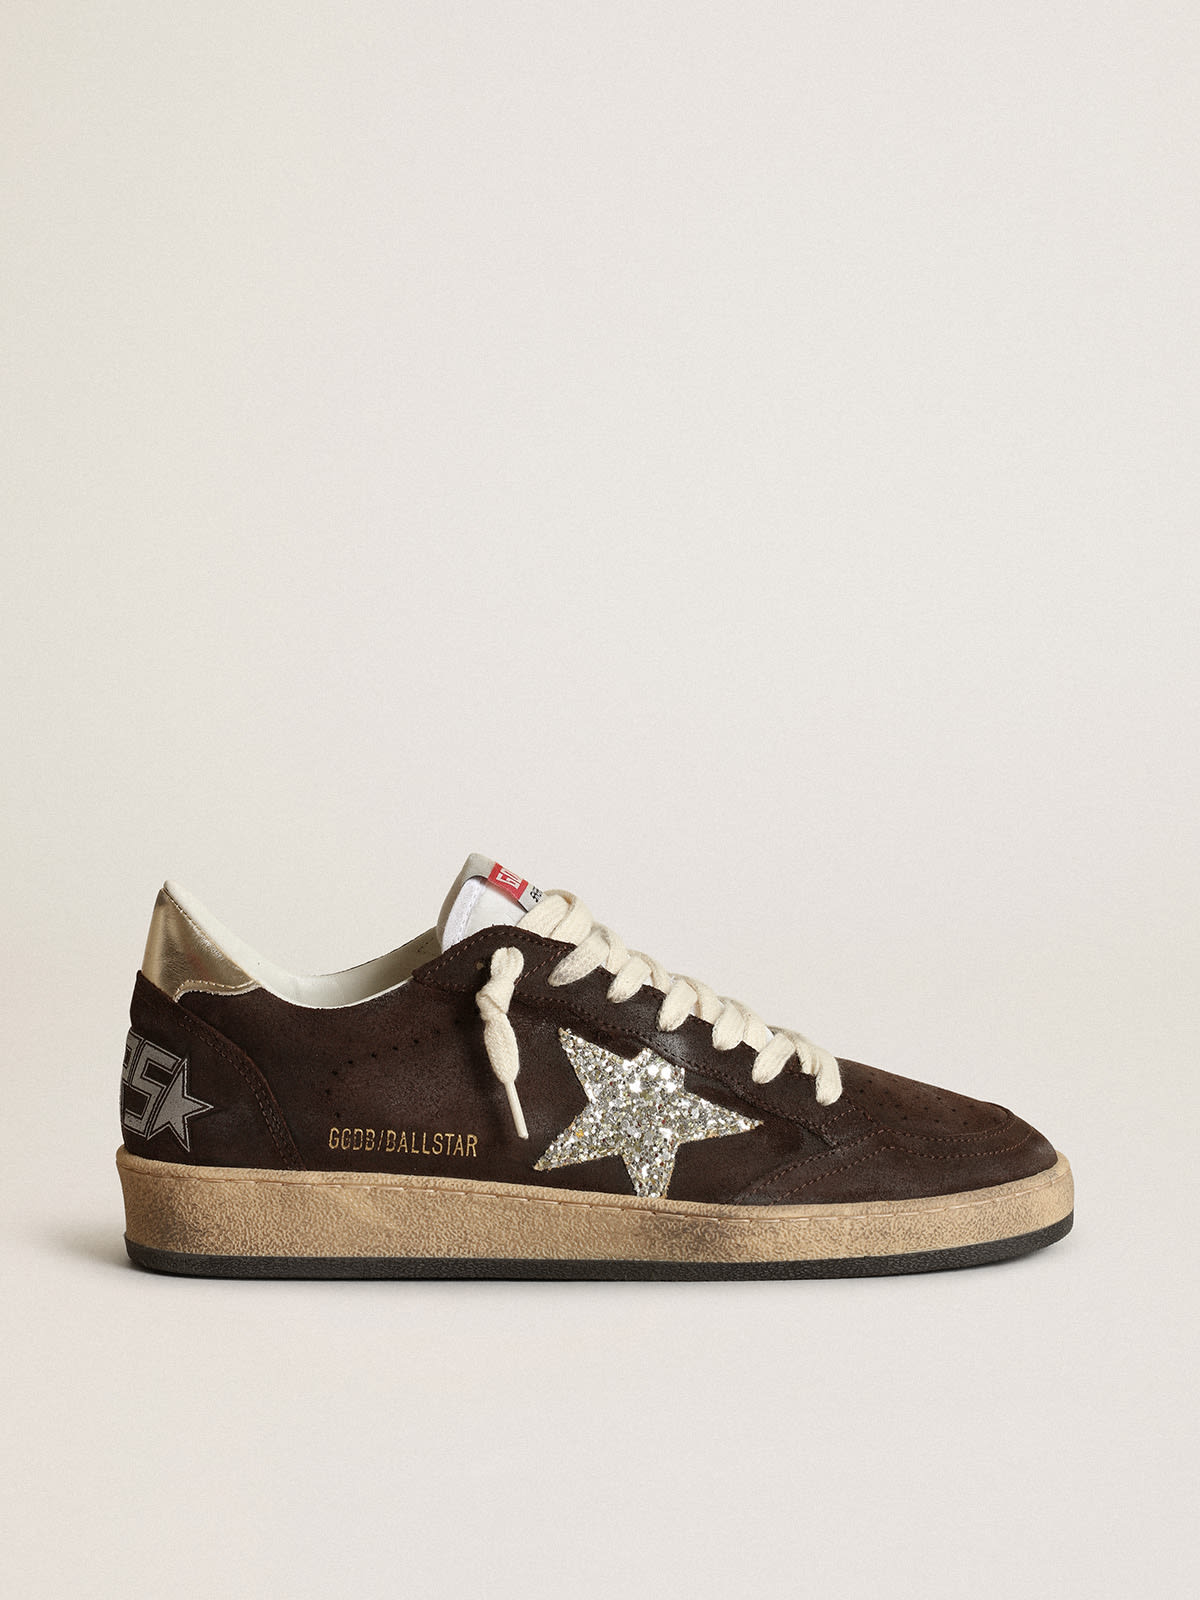 Golden Goose - Ball Star sneakers in brown suede with platinum glitter star and white nylon tongue in 